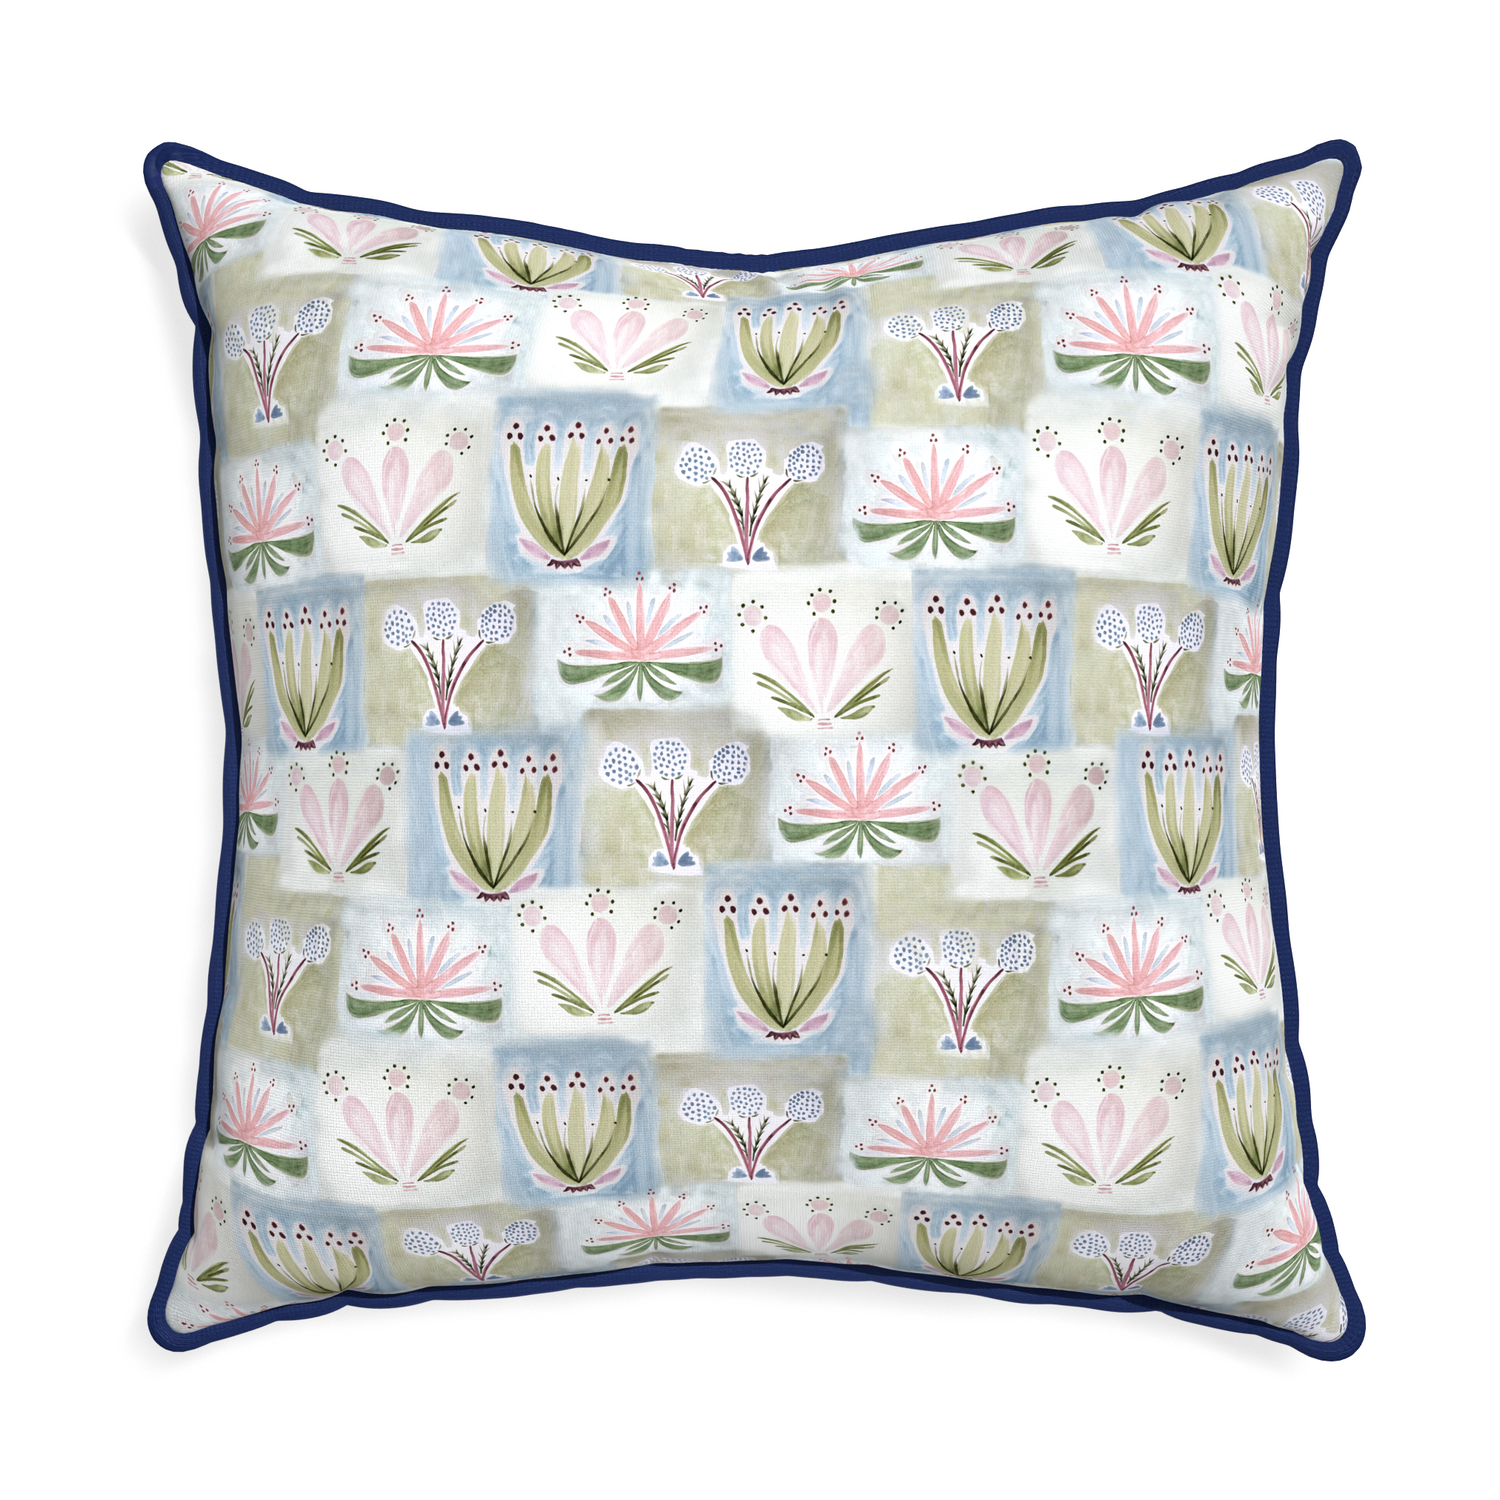 Euro-sham harper custom hand-painted floralpillow with midnight piping on white background